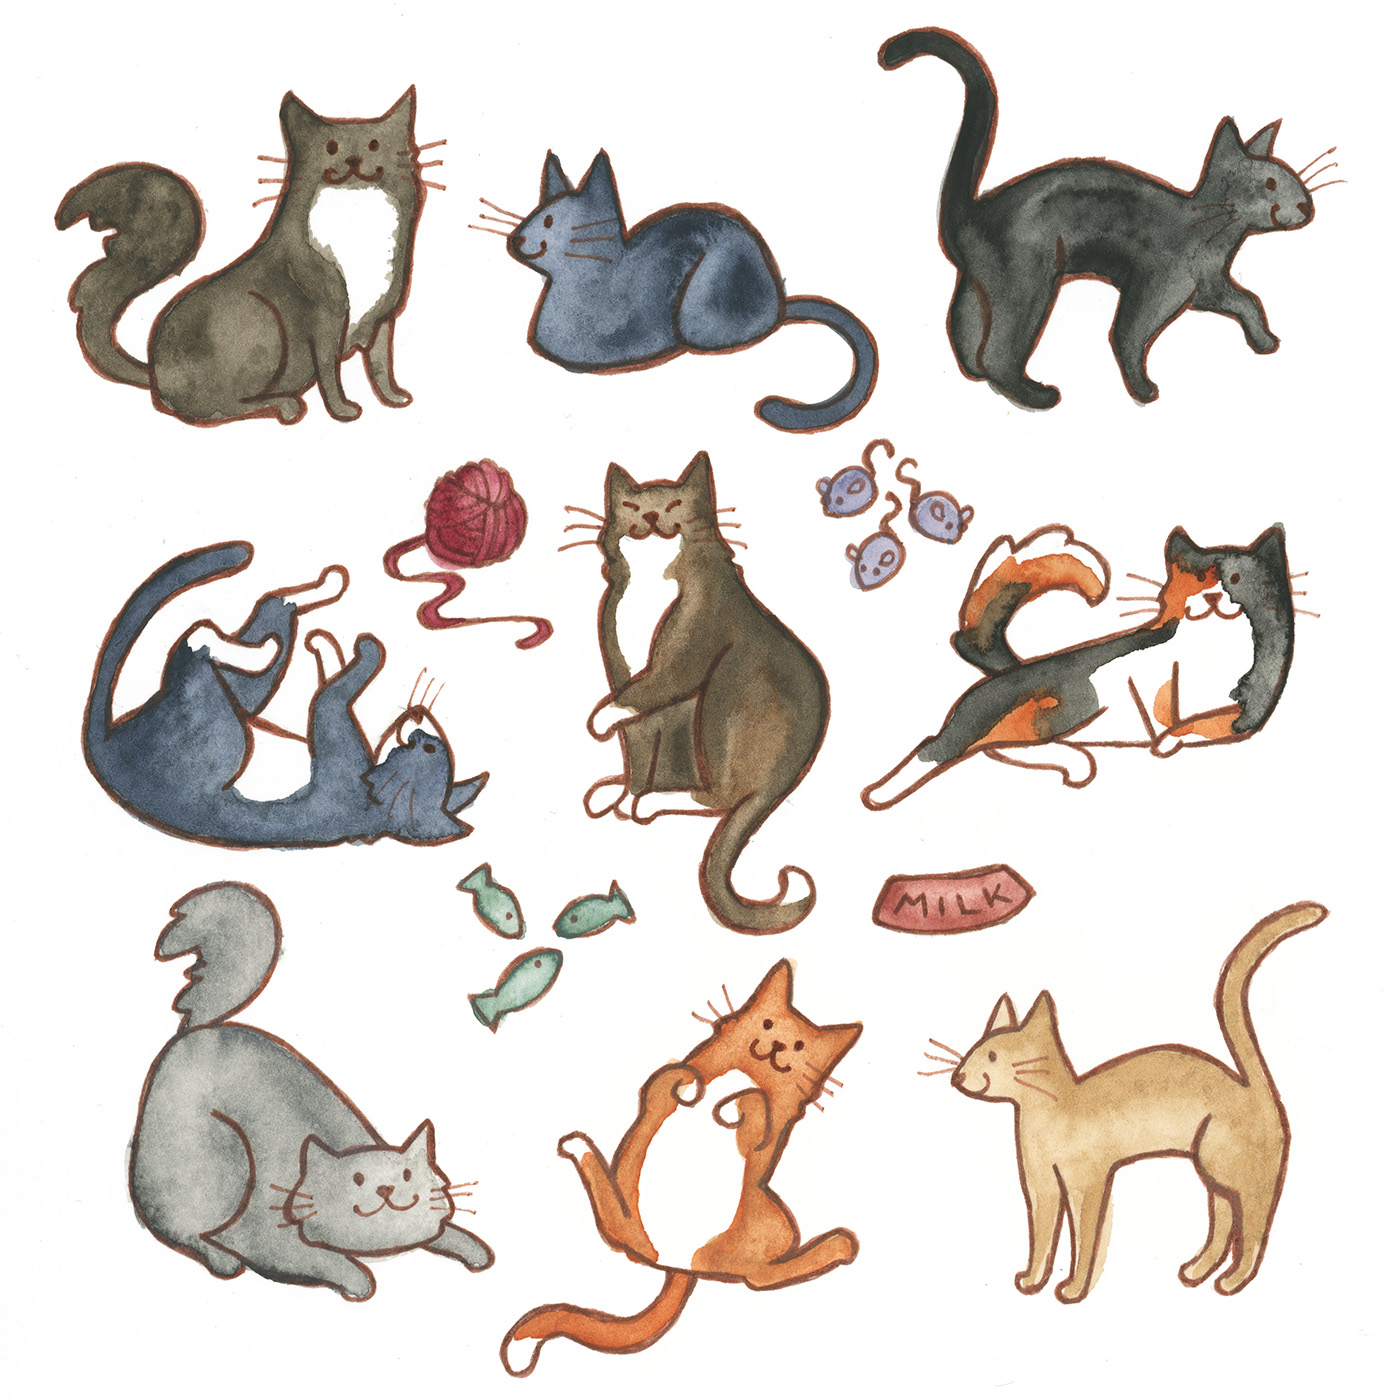 watercolor cats dogs Coffee tea Patterns design